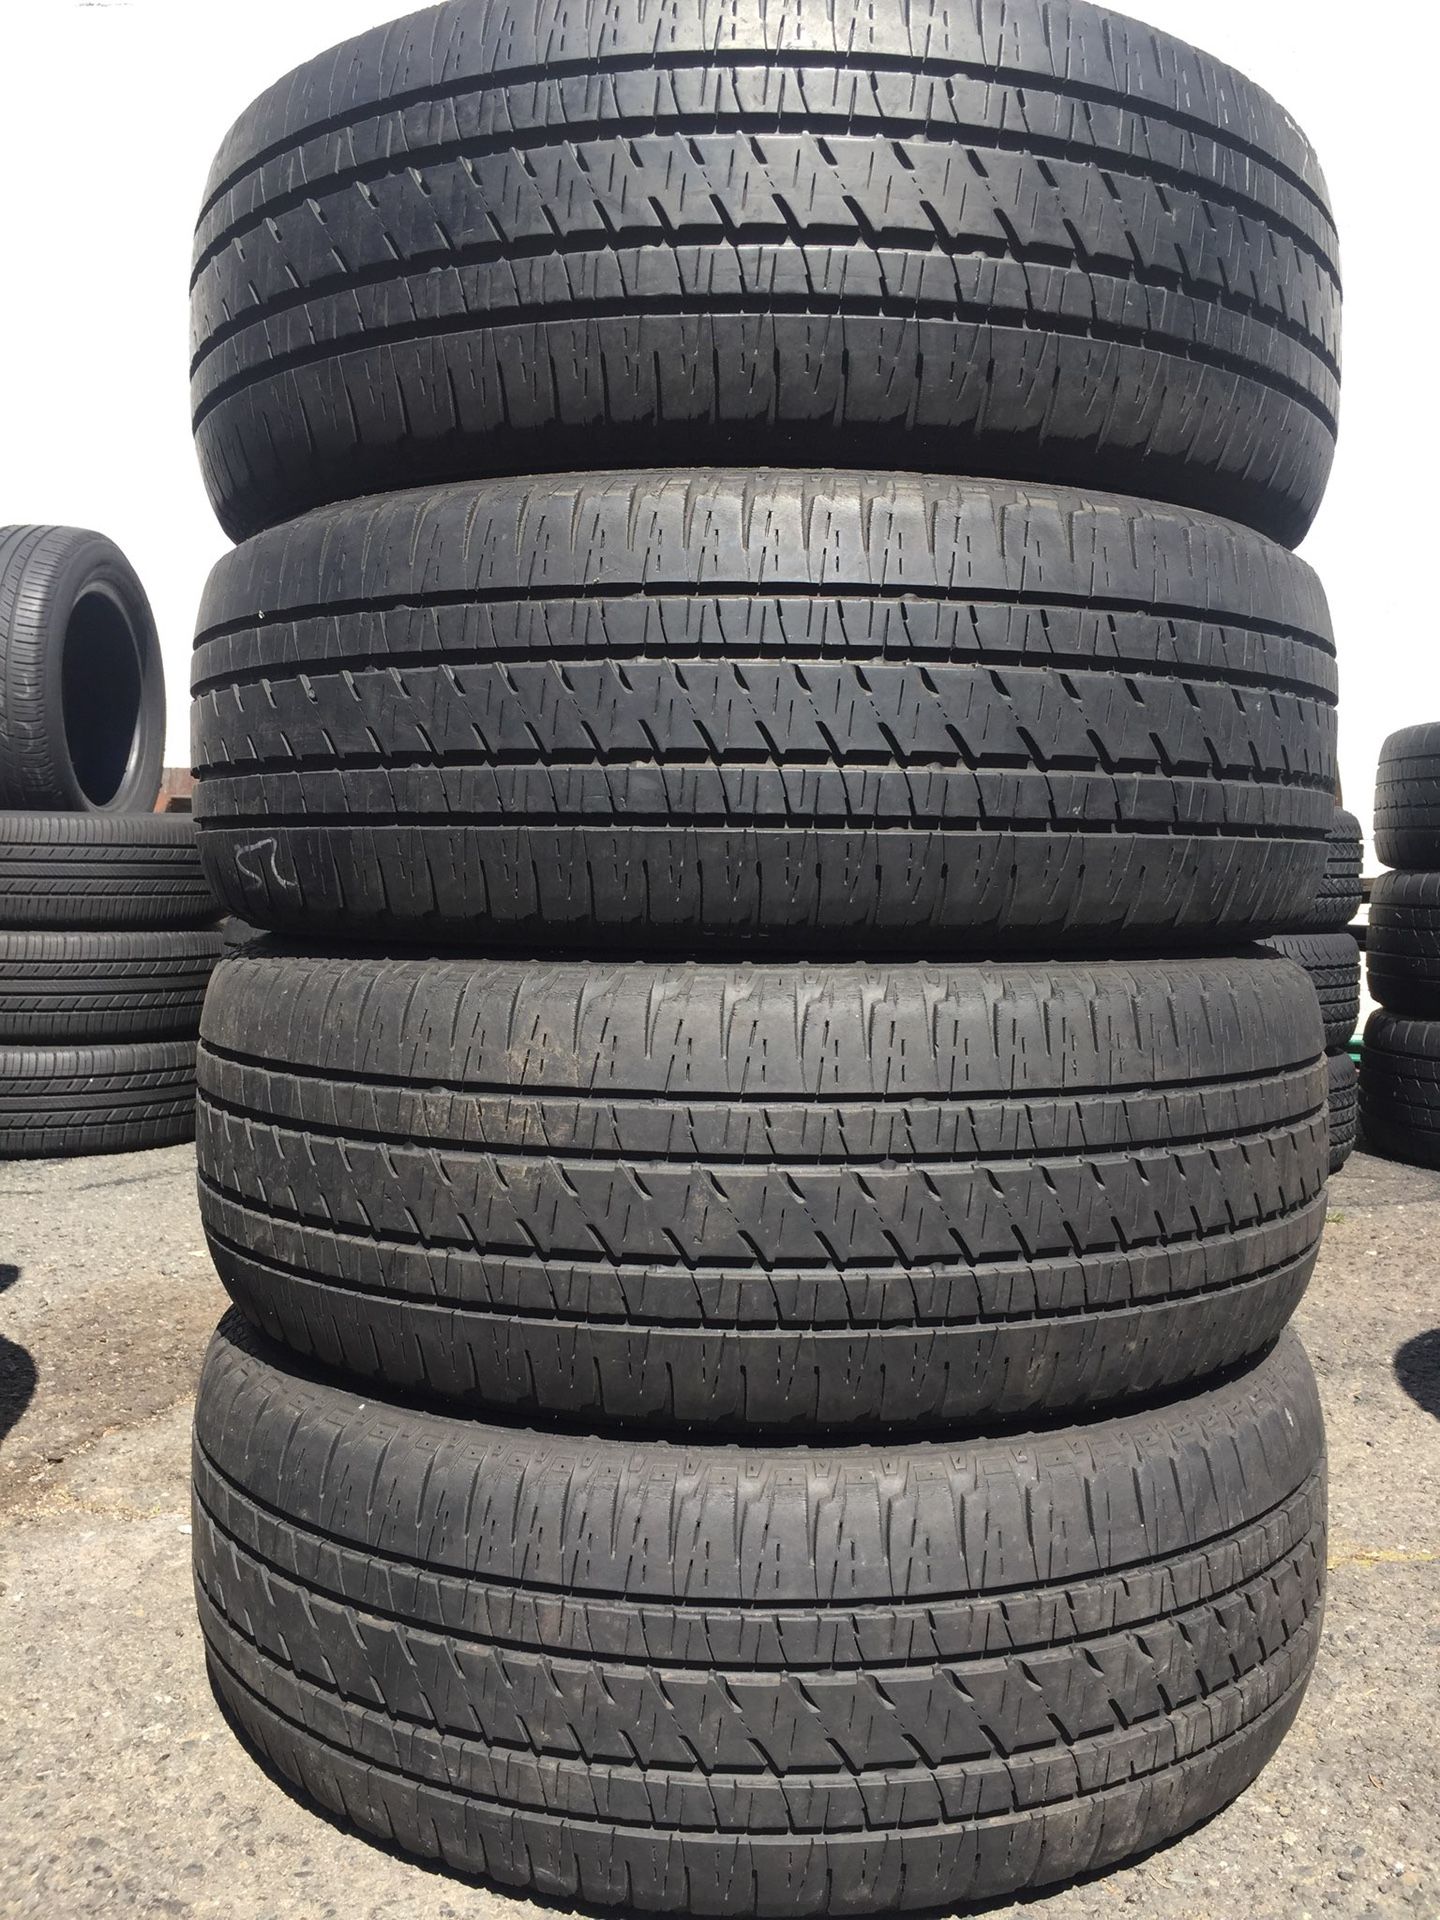 255/55/20 Bridgestone set of used tires in great condition 70% tread 250$ for 4 . Installation balance and alignment available. Road force balance a